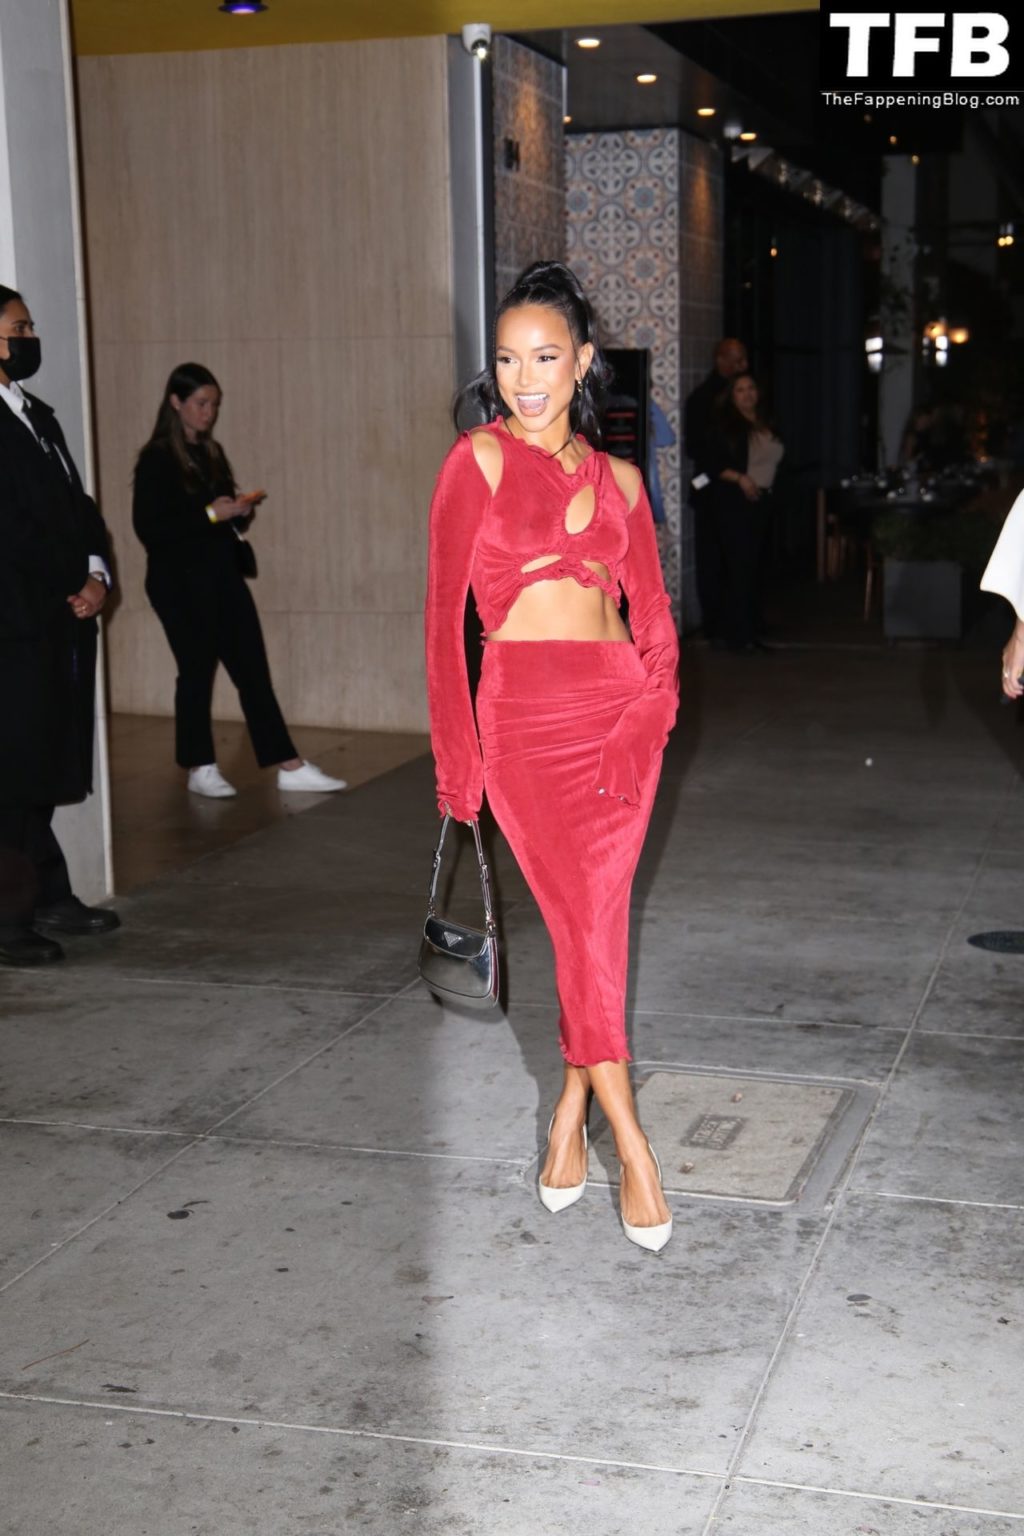 Karrueche Tran Shows Her Pokies in a Red Dress at The Hollywood Reporter’s Oscar Nominees Night (68 Photos)